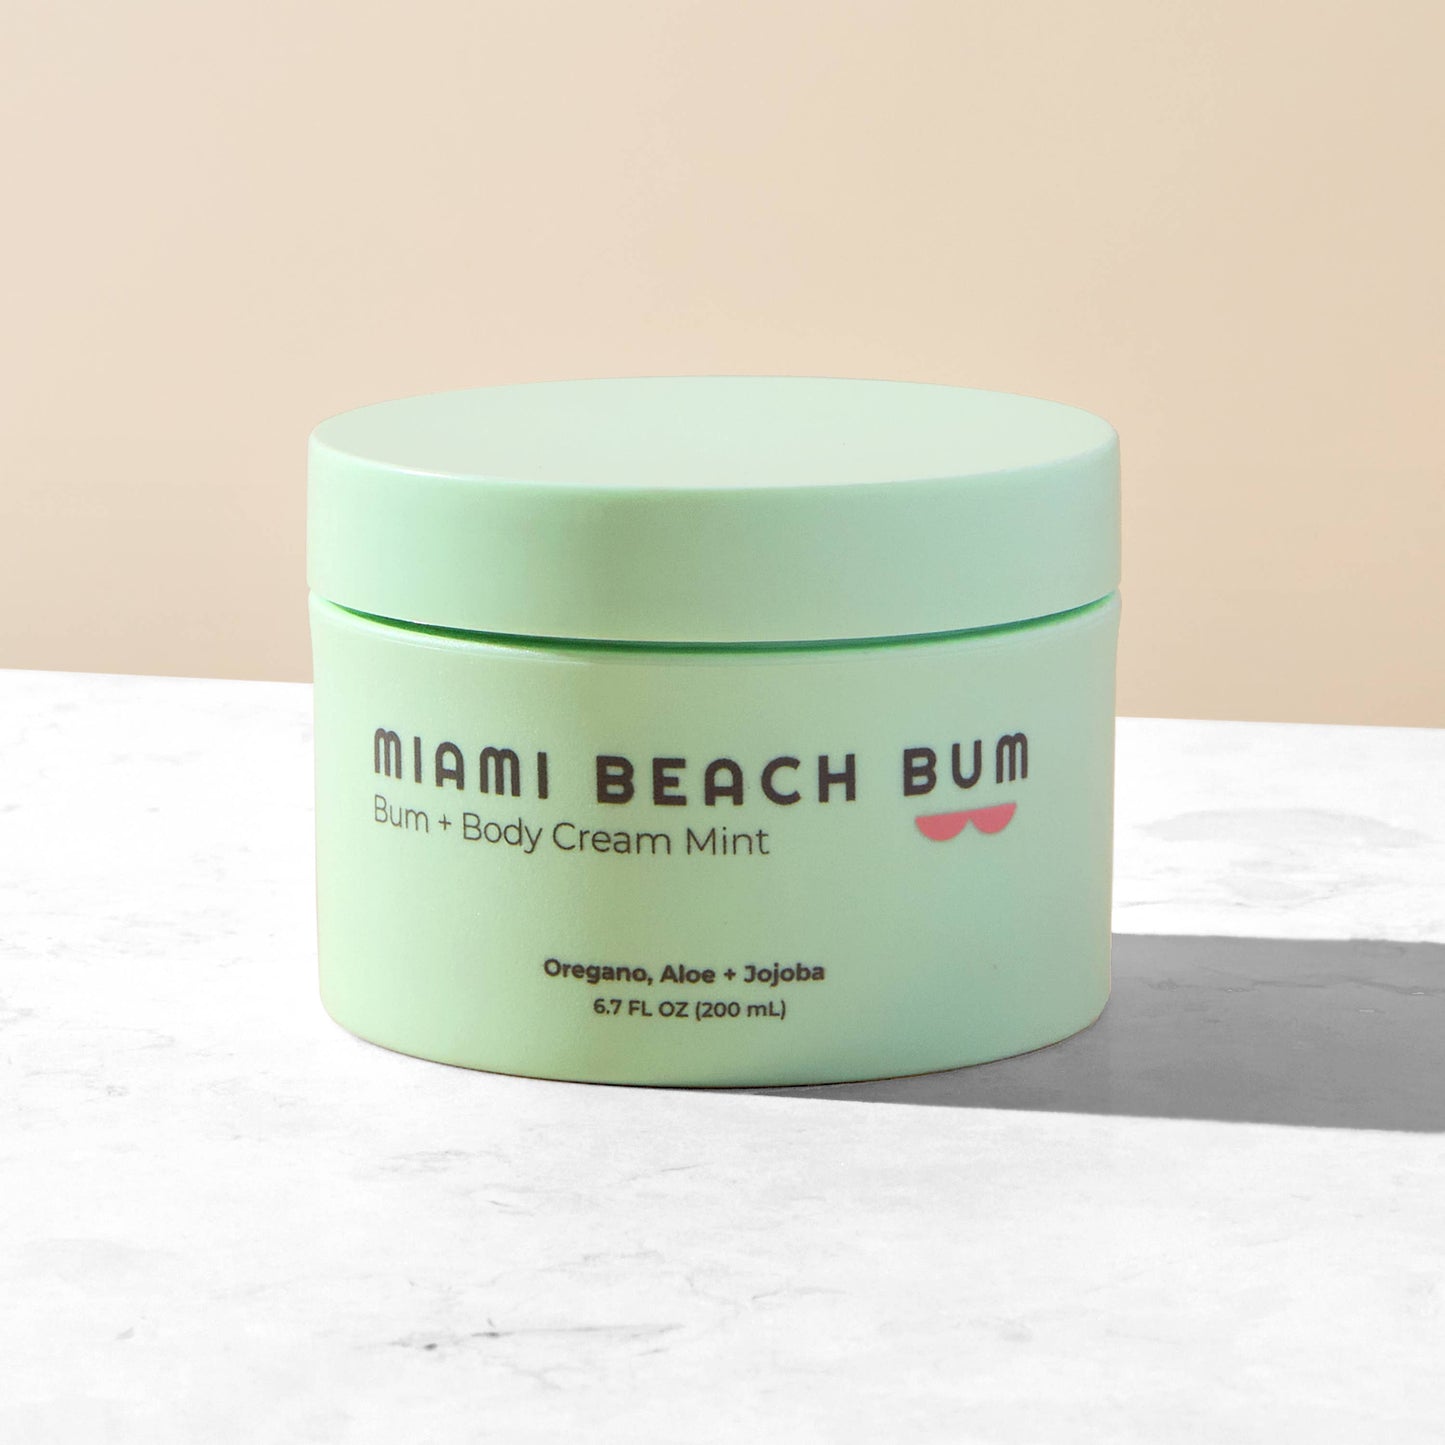 Load image into Gallery viewer, Miami Beach Bum Bum and Body Cream Mint
